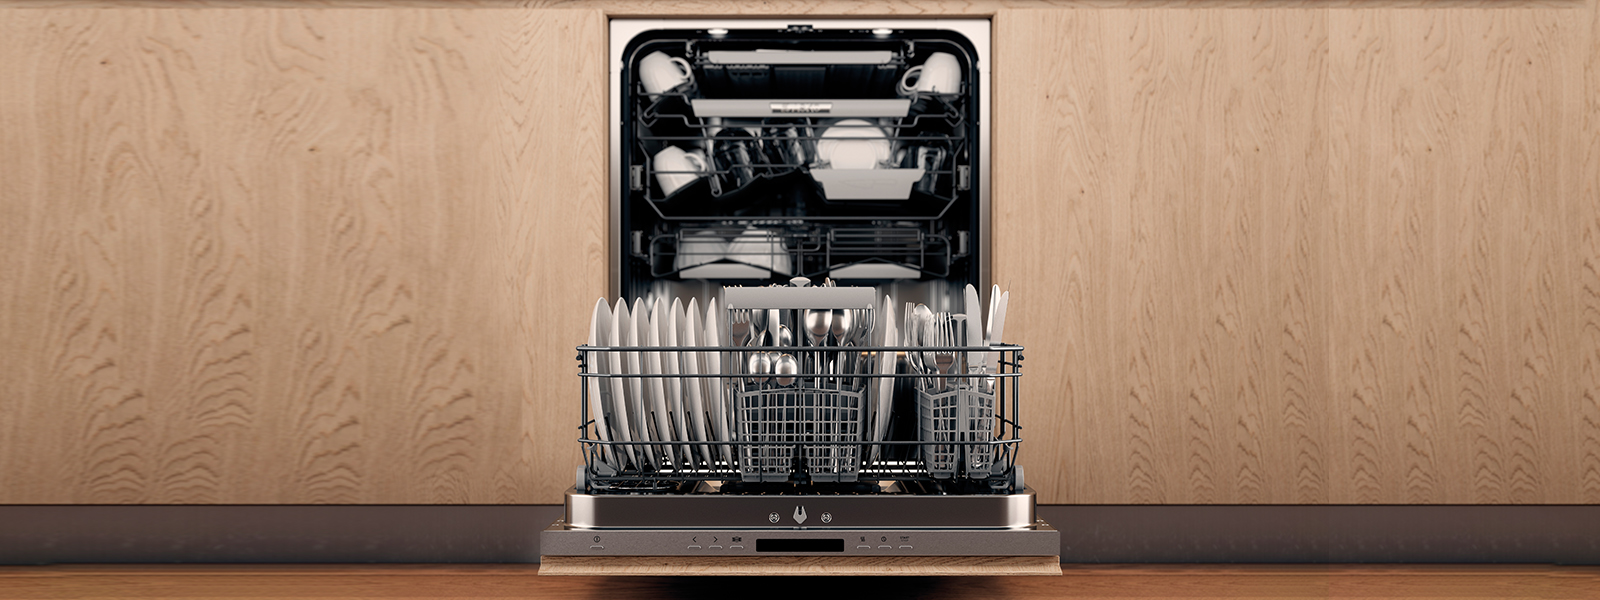 Save up to $300 on selected ASKO Dishwashers at Hart & Co